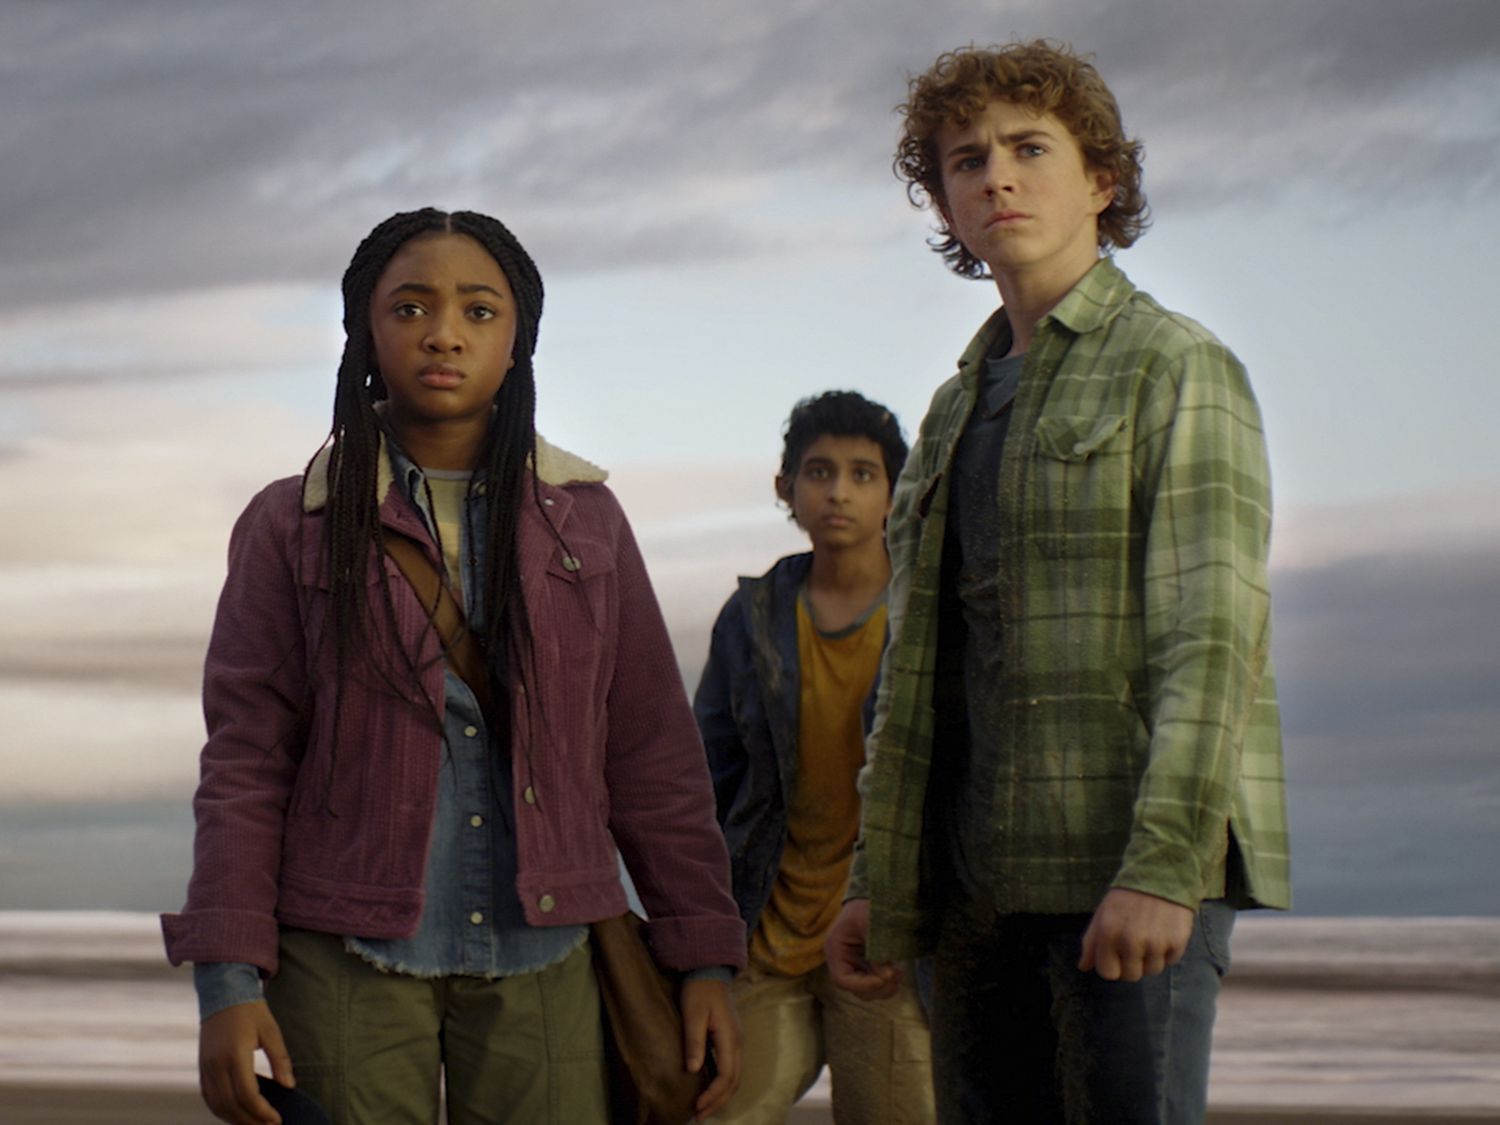 Disney+ Series 'Percy Jackson and the Olympians' Shatters Records A Must-Watch for Fantasy Fans